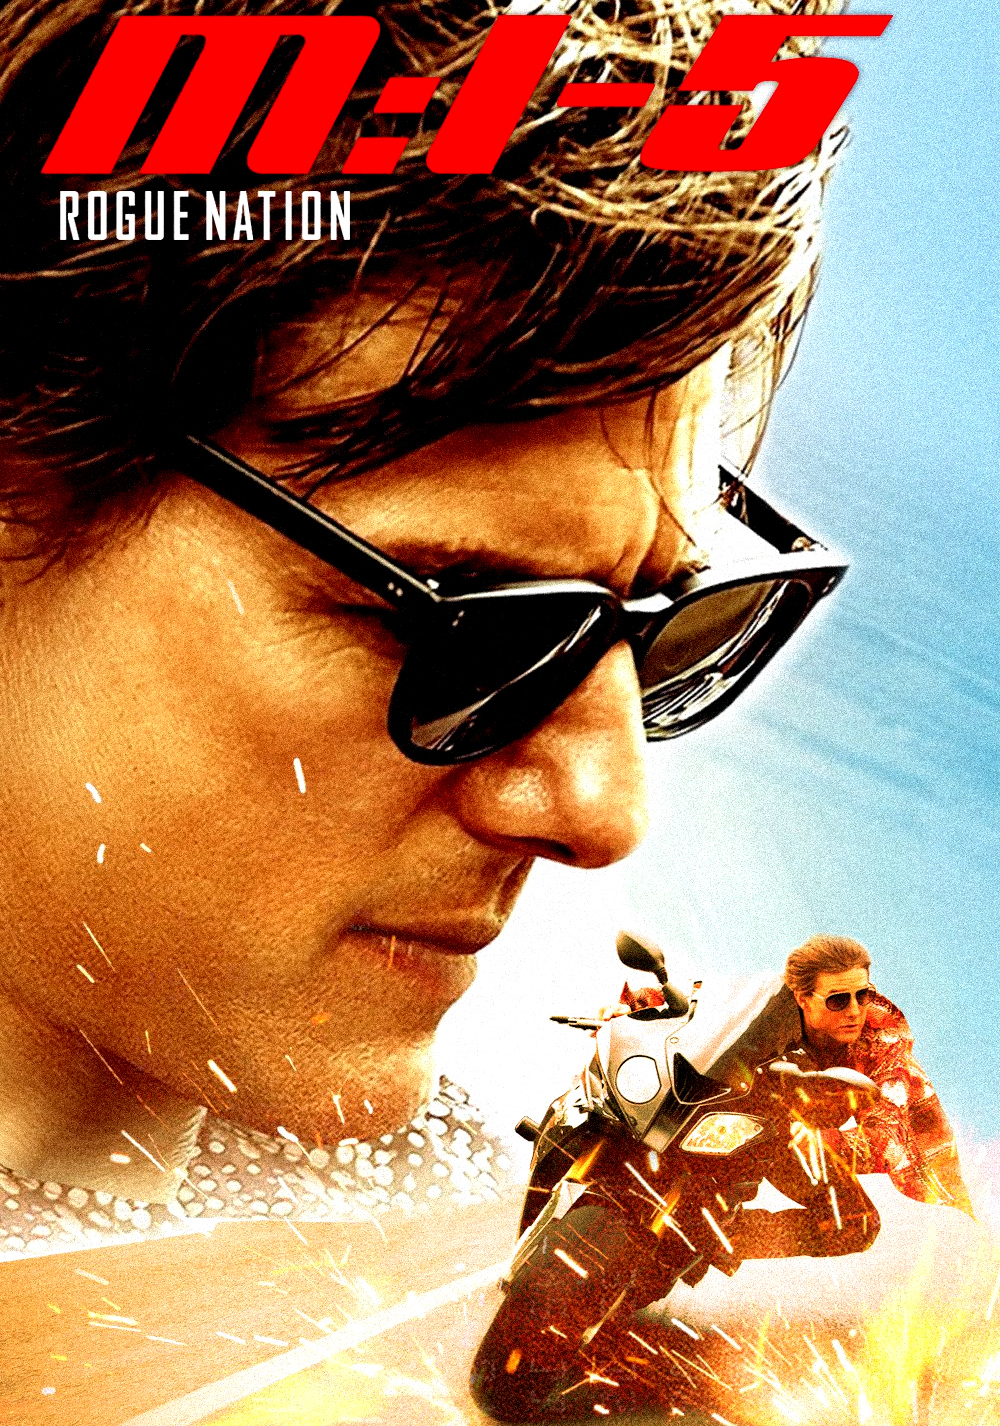 mission impossible 5 movies mkv download